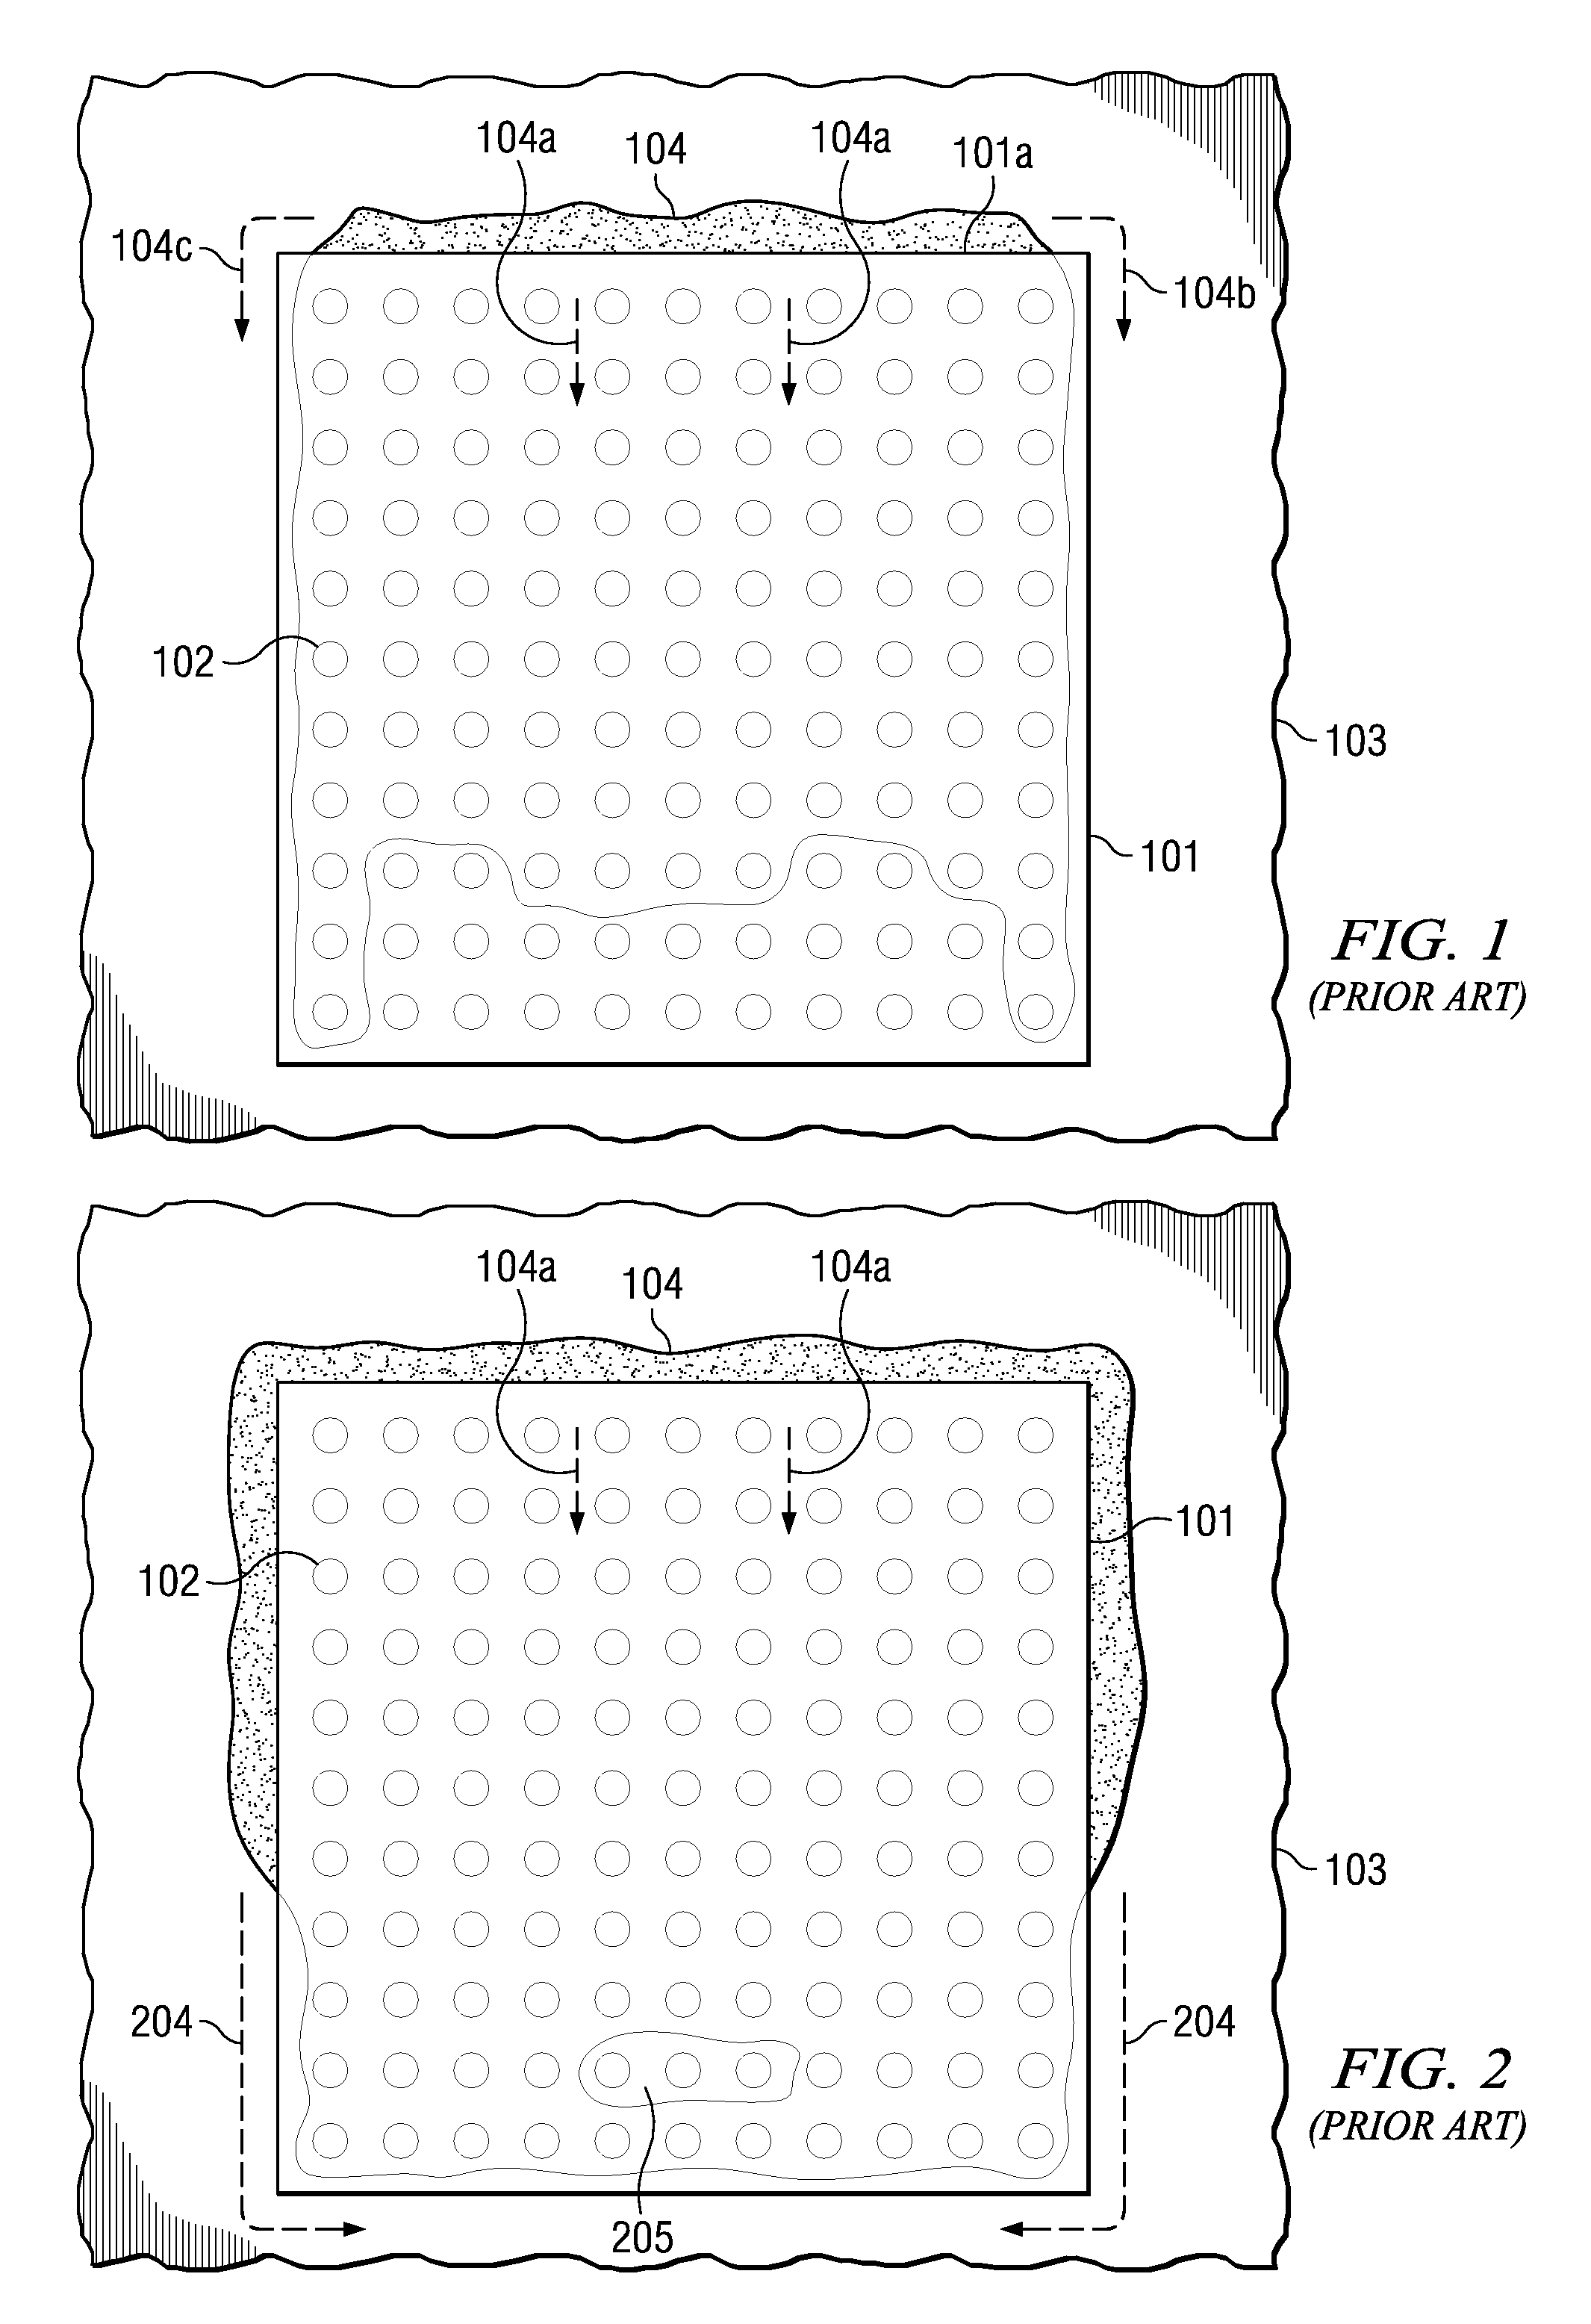 Thermal method to control underfill flow in semiconductor devices